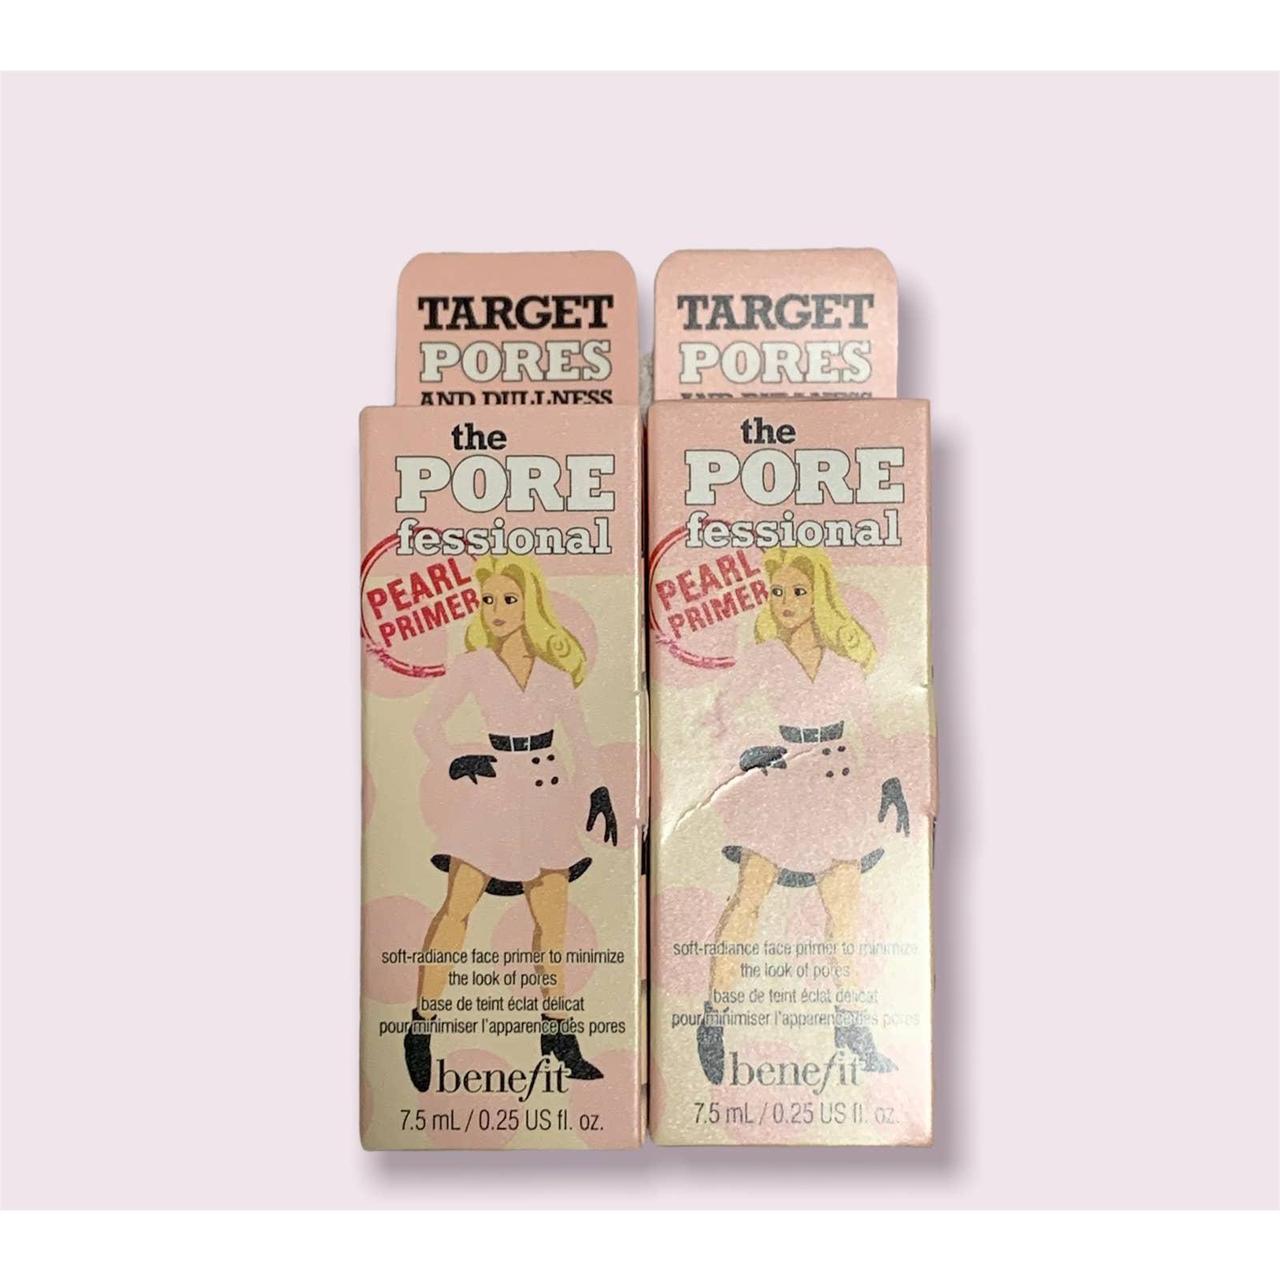 Product Image 1 - 2 boxes of BENEFIT THE